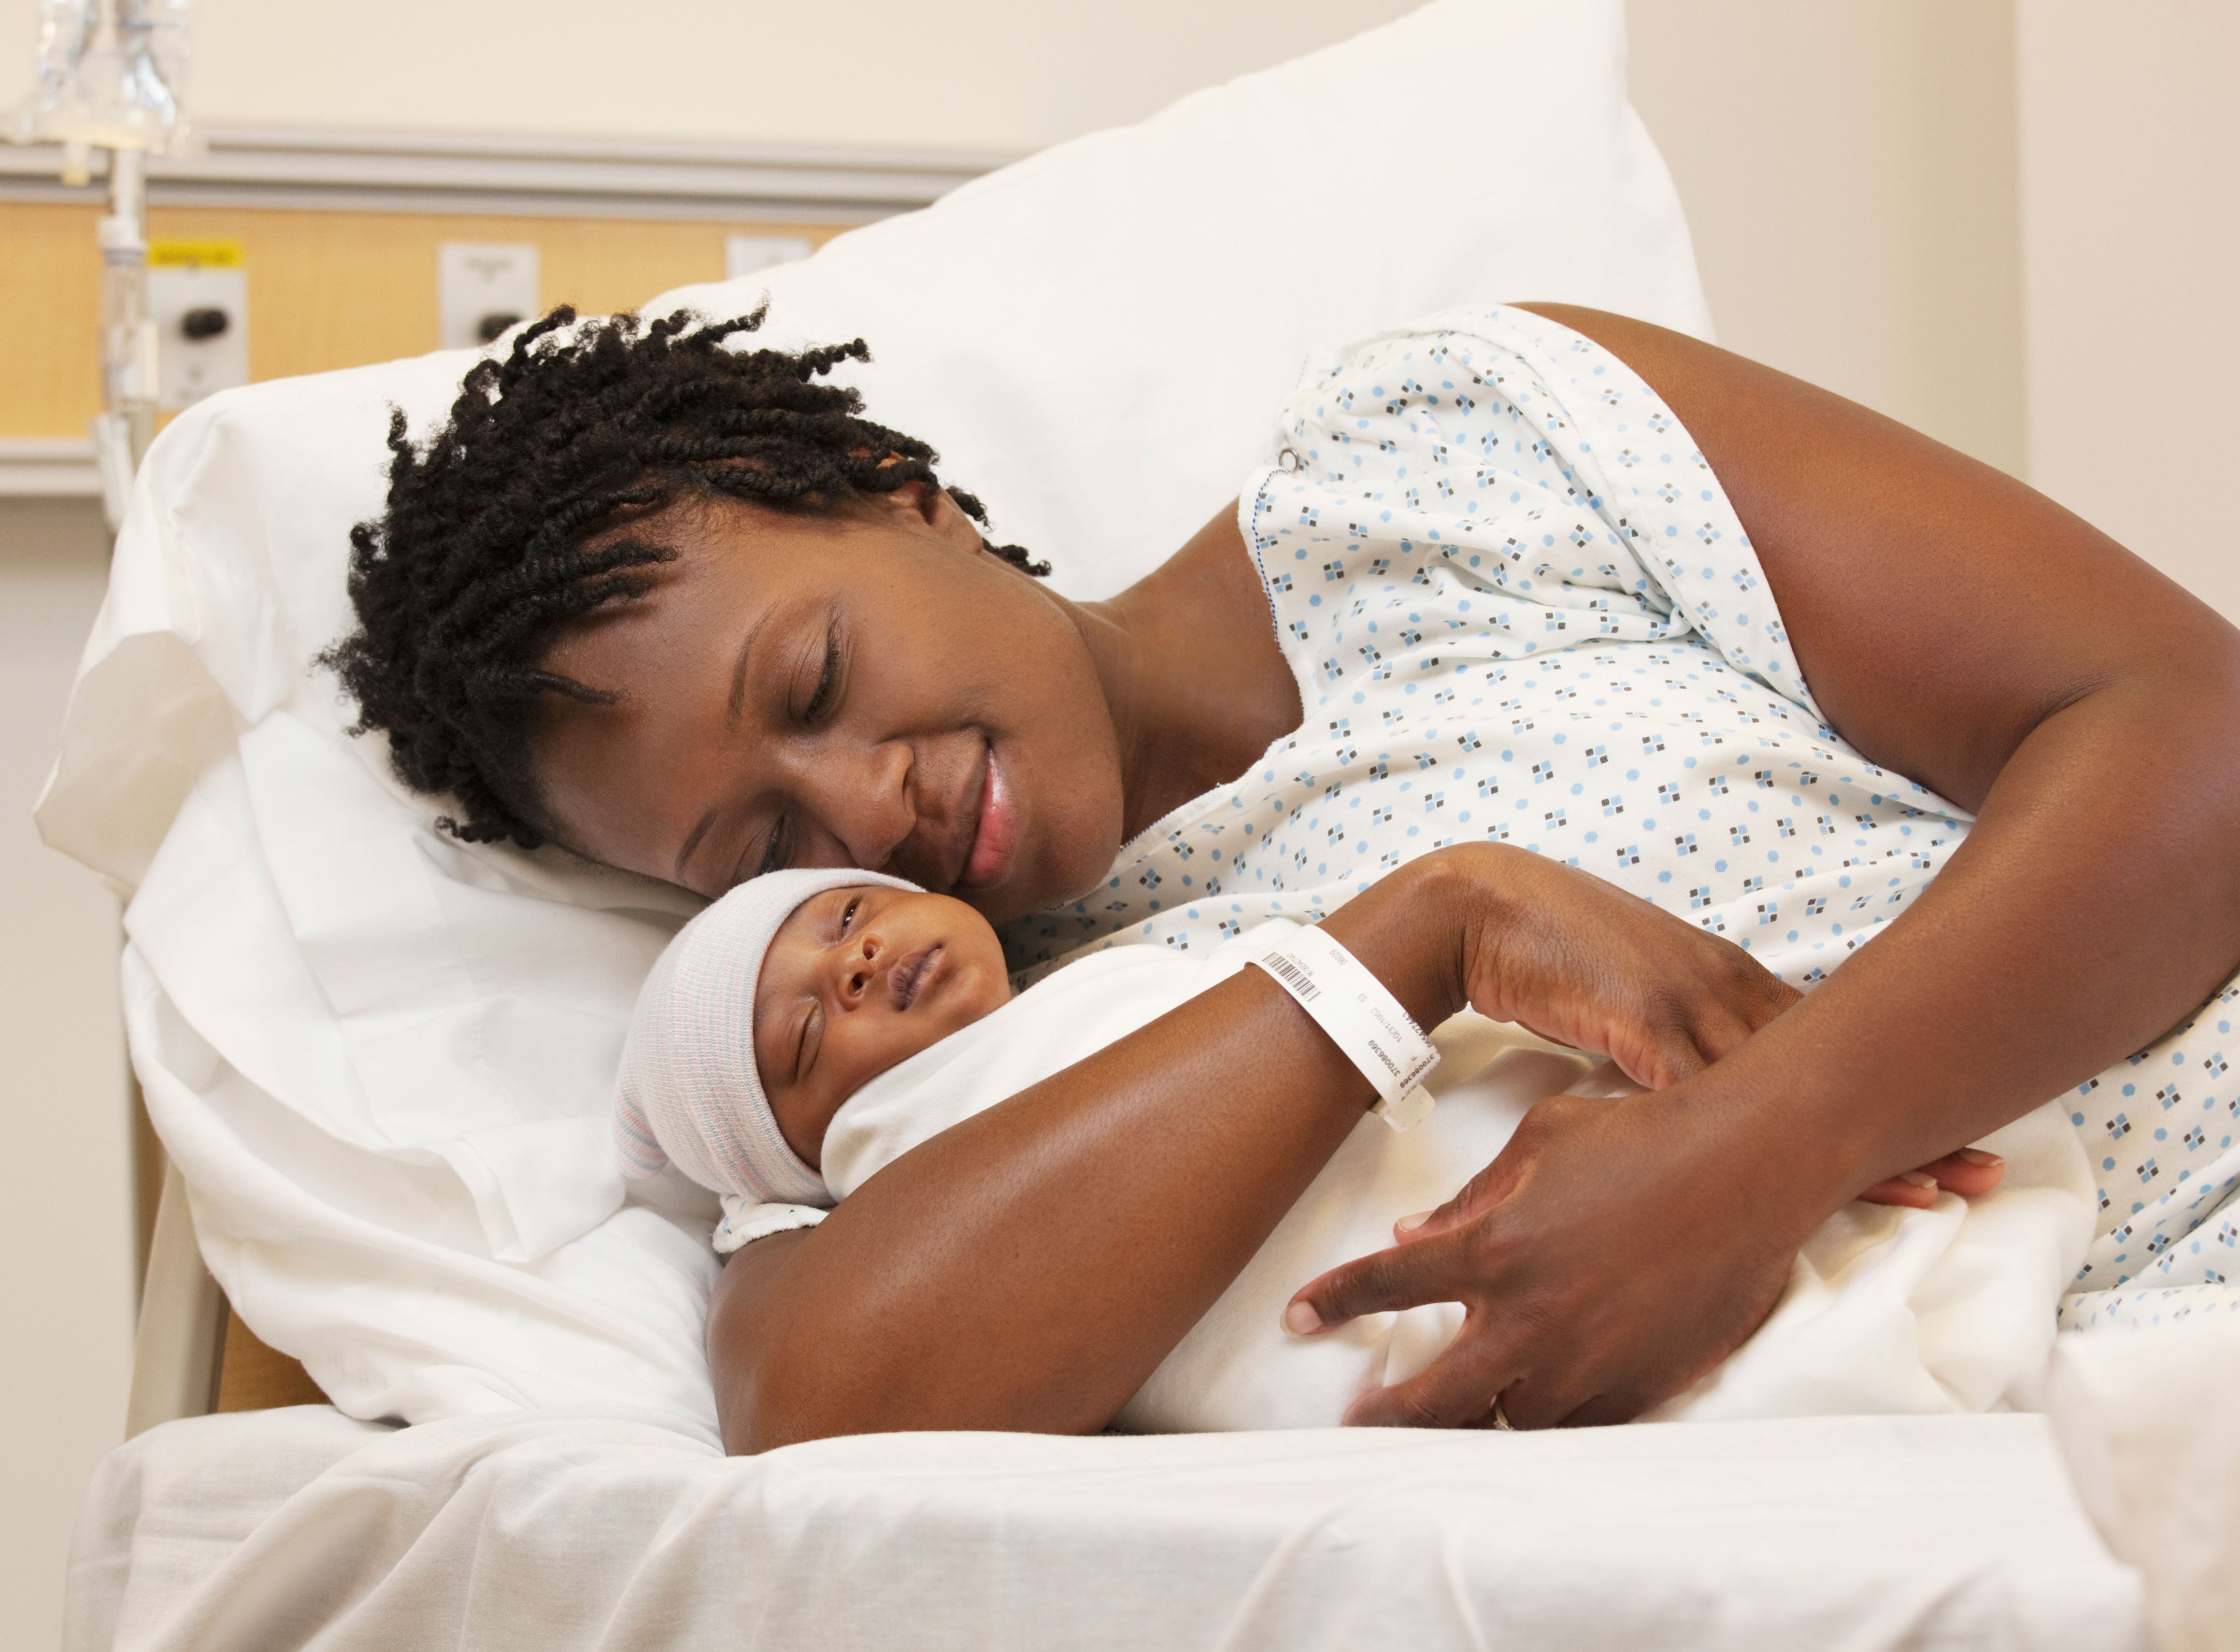 15 Ways To Help a Parent With a Baby in The NICU